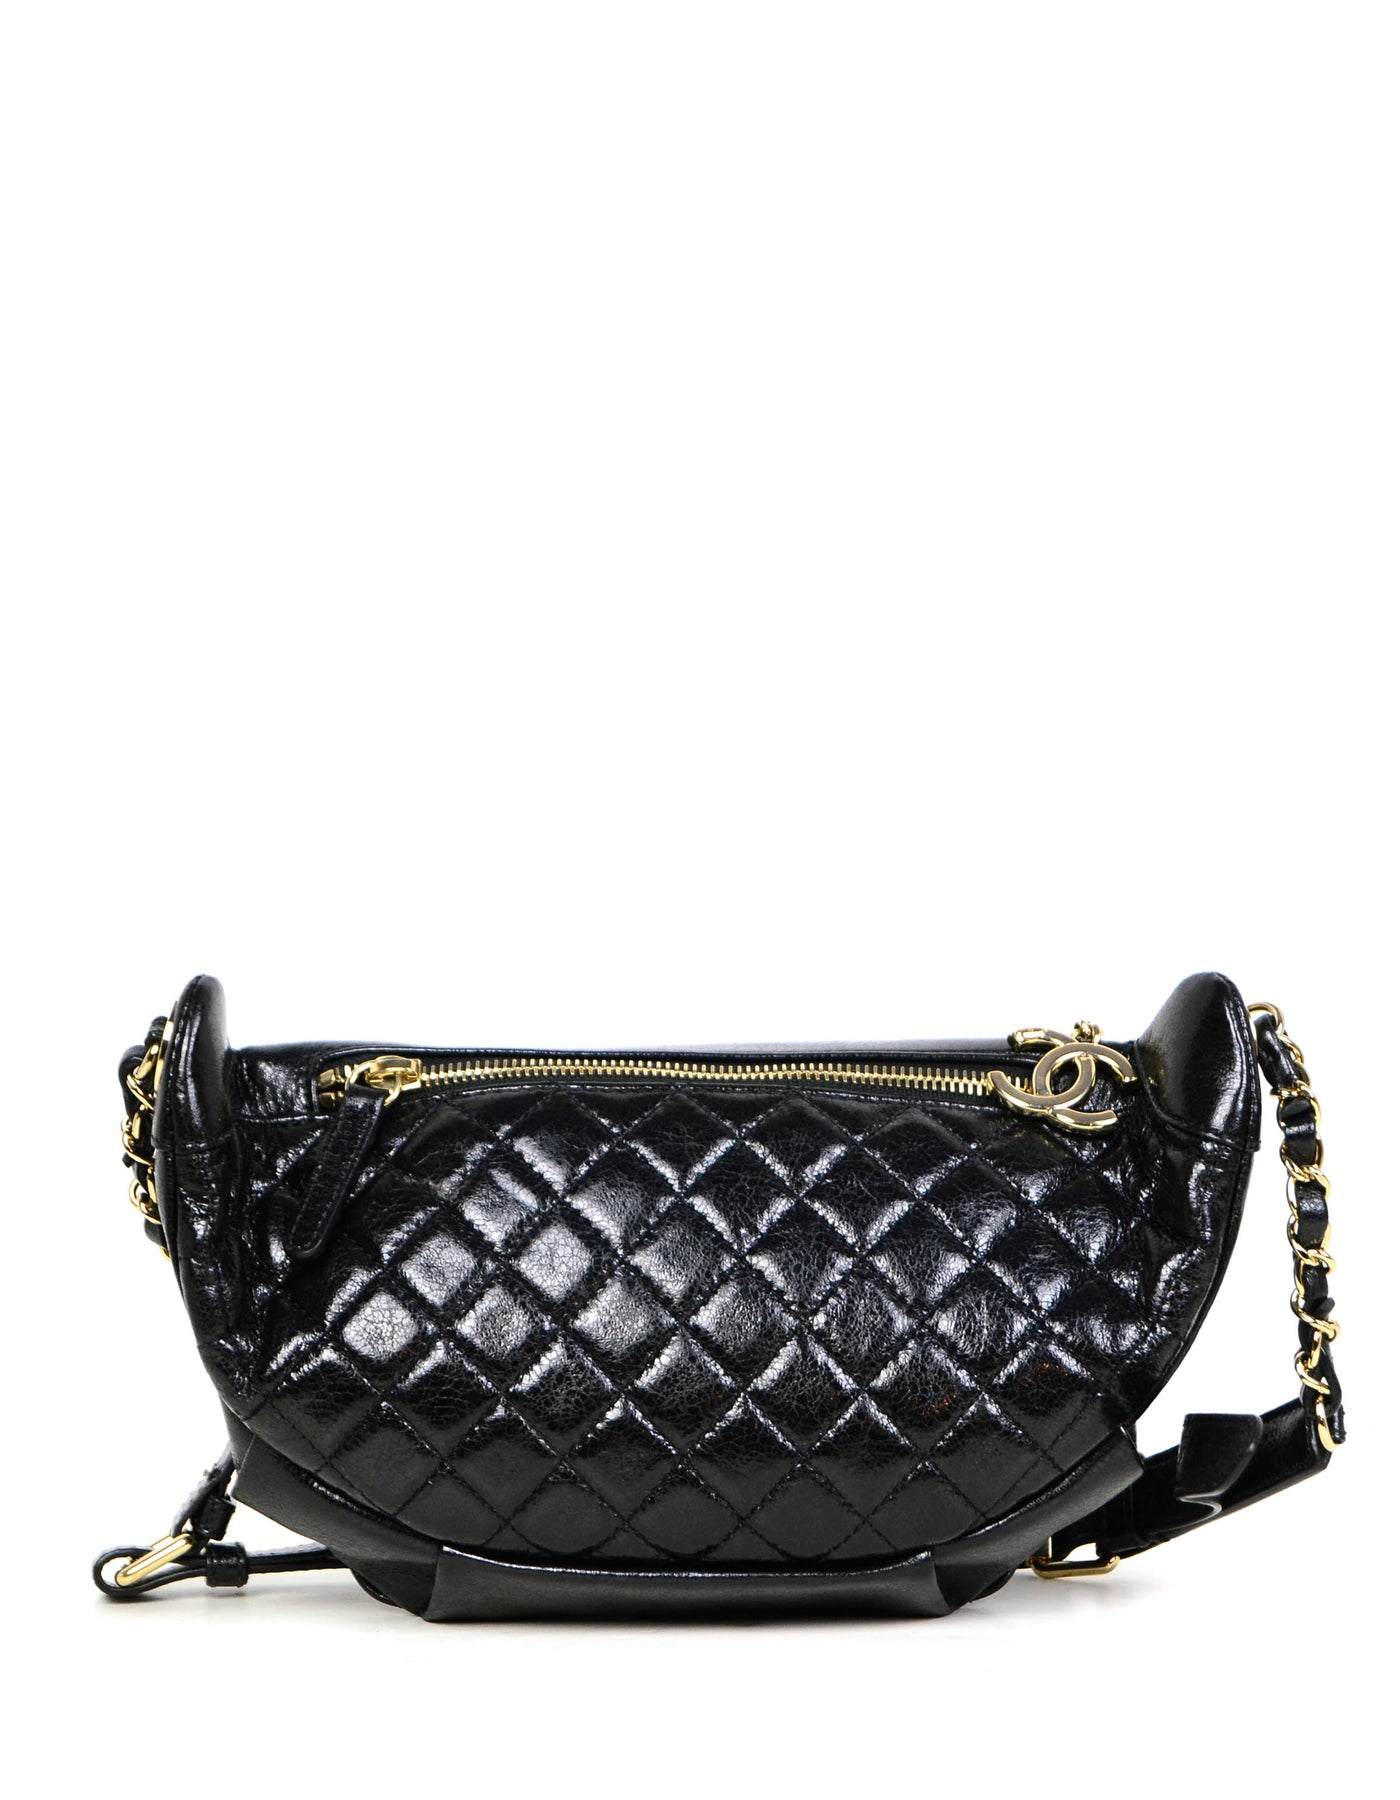 CHANEL, Bags, Final Price Chanel Le Rogue Badminton Fanny Pack